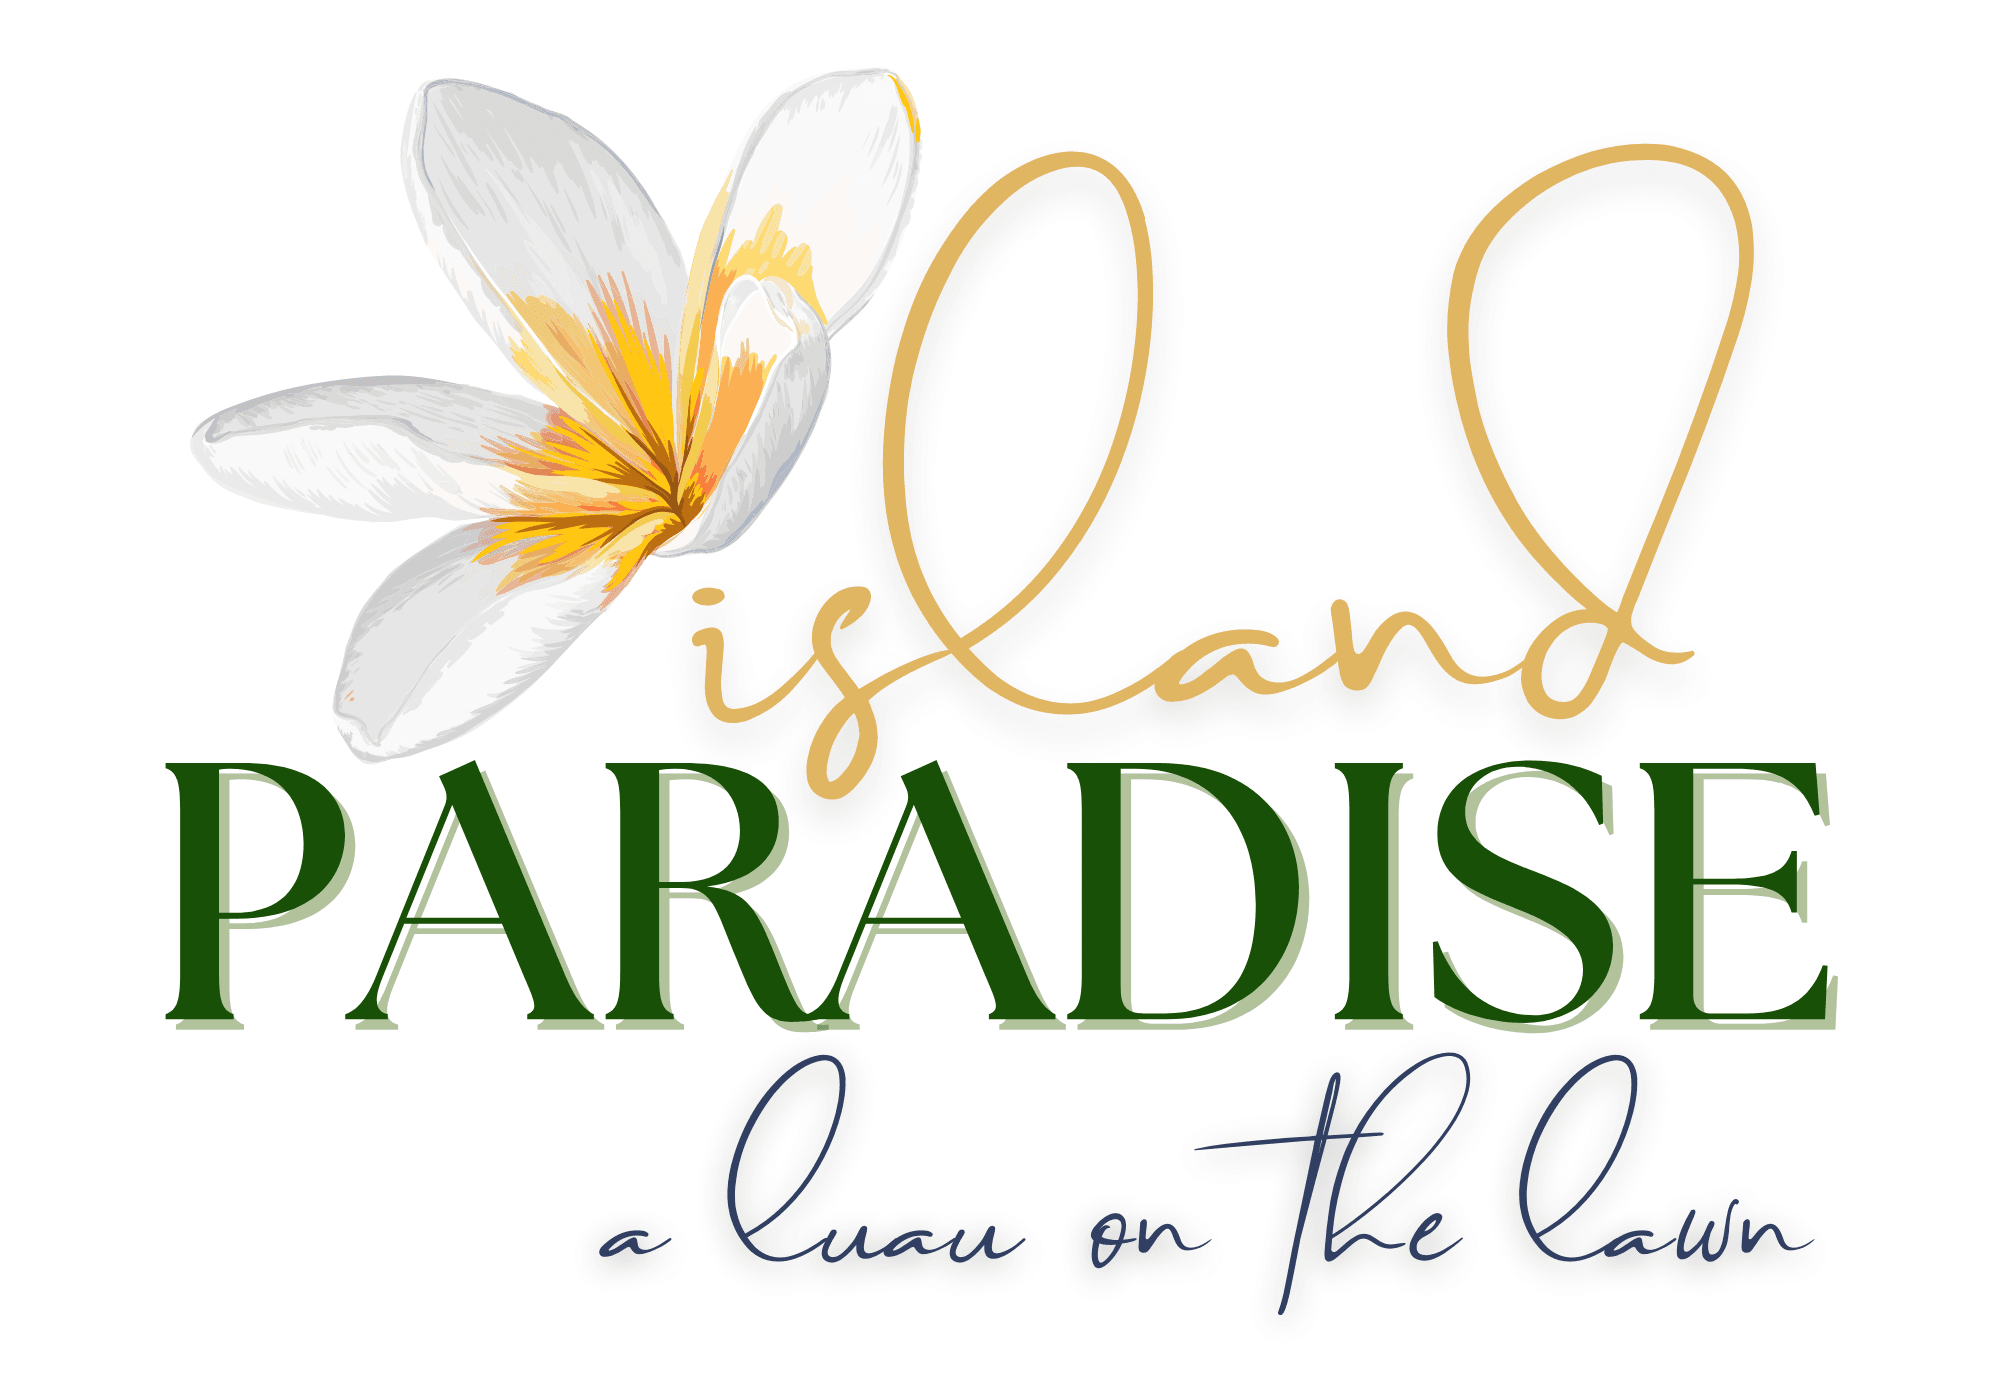 Join us at Island Paradise: Annual Gala on October 28th!